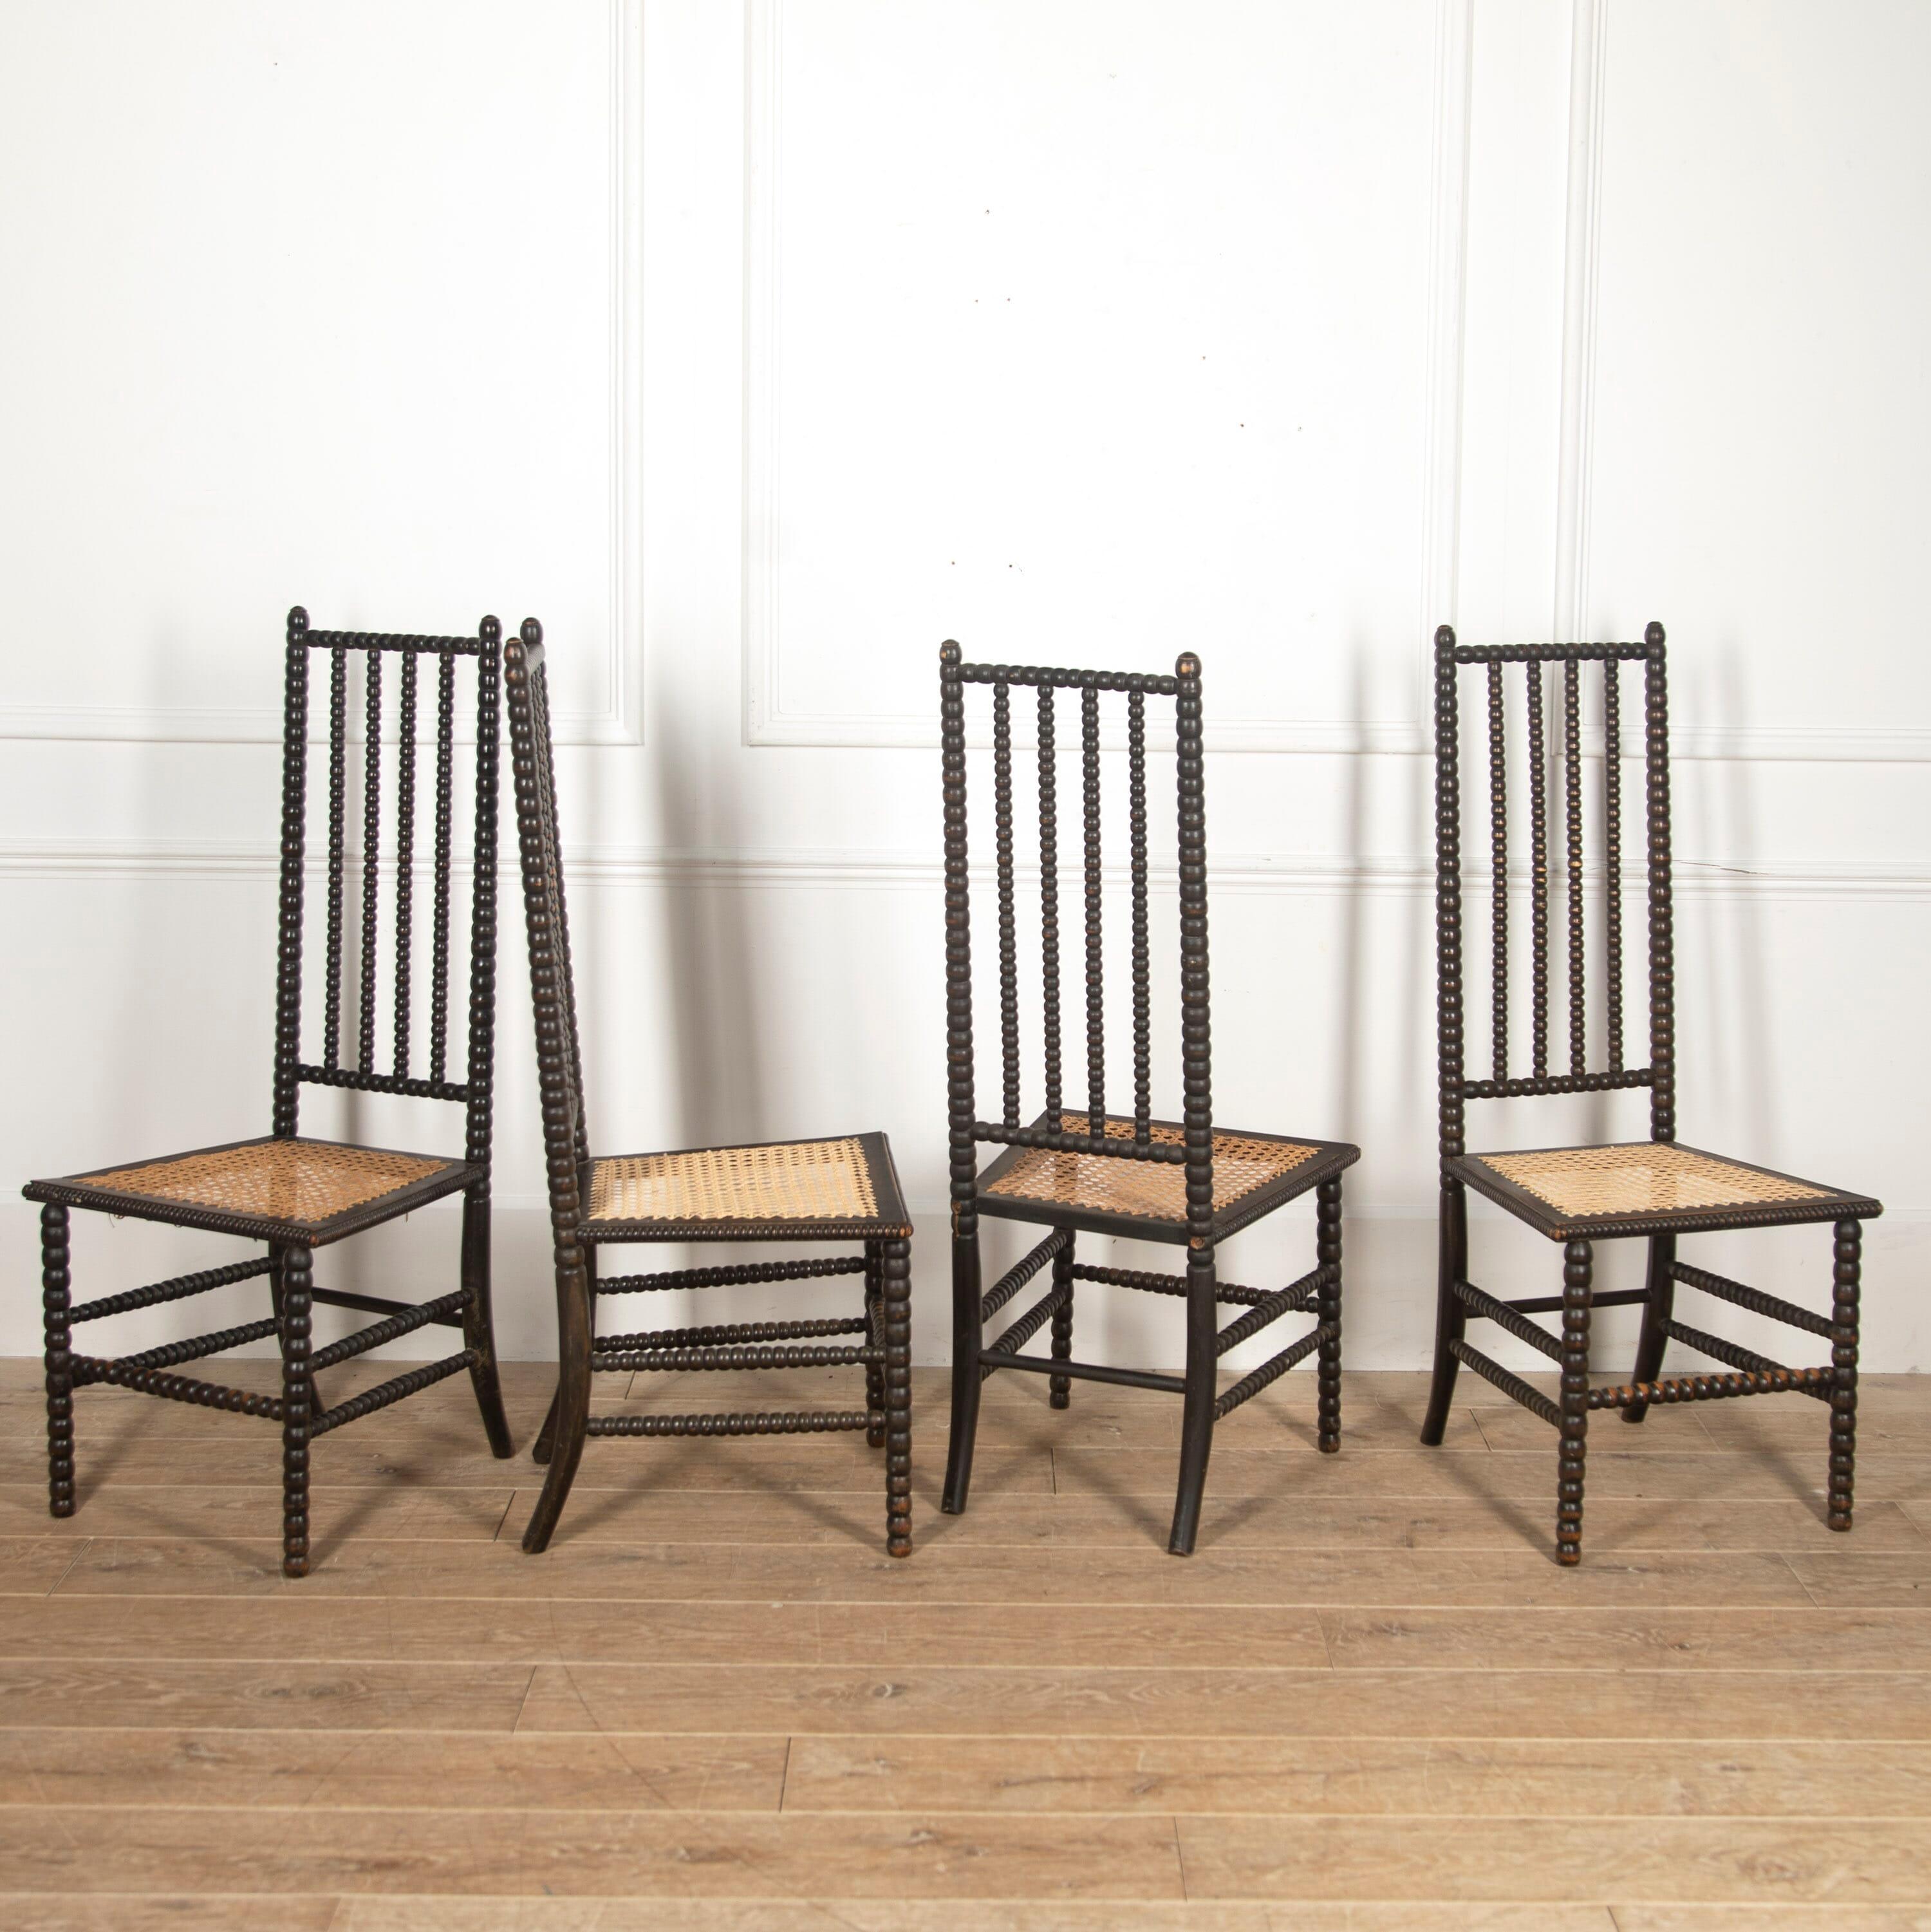 Lovely set of four 19th Century bobbin chairs. 

Originally from Scotland, these chairs are typical of the bobbin style.

These wonderful chairs are well-proportioned and have beautifully turned, spool style frames. 

They have a beautiful